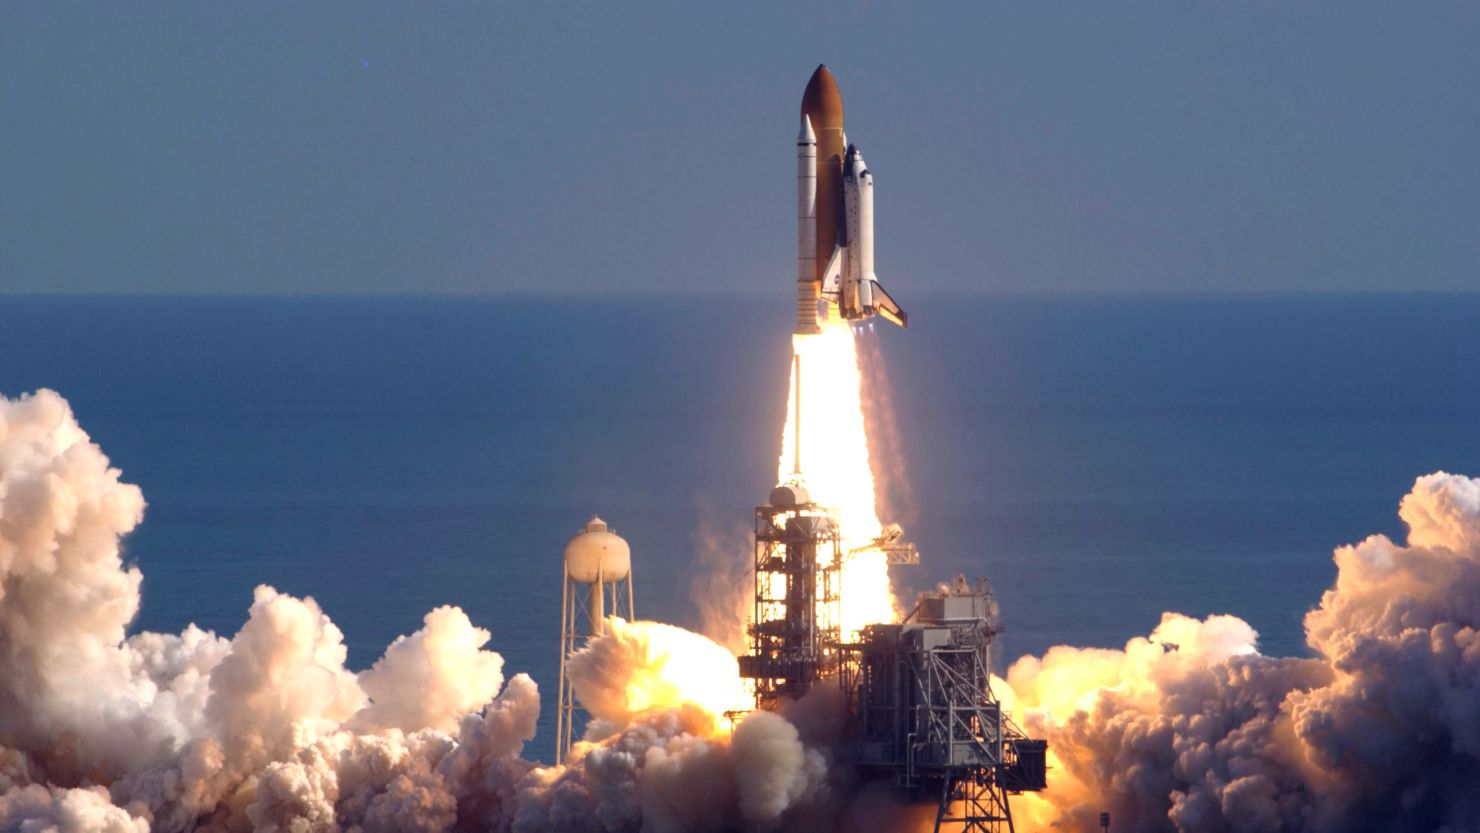 Space shuttle Columbia lifts off from NASA's Kennedy Space Center on January 16, 2003, in Florida. Columbia broke up upon reentry to Earth and the seven-person crew was lost February 1, 2003.